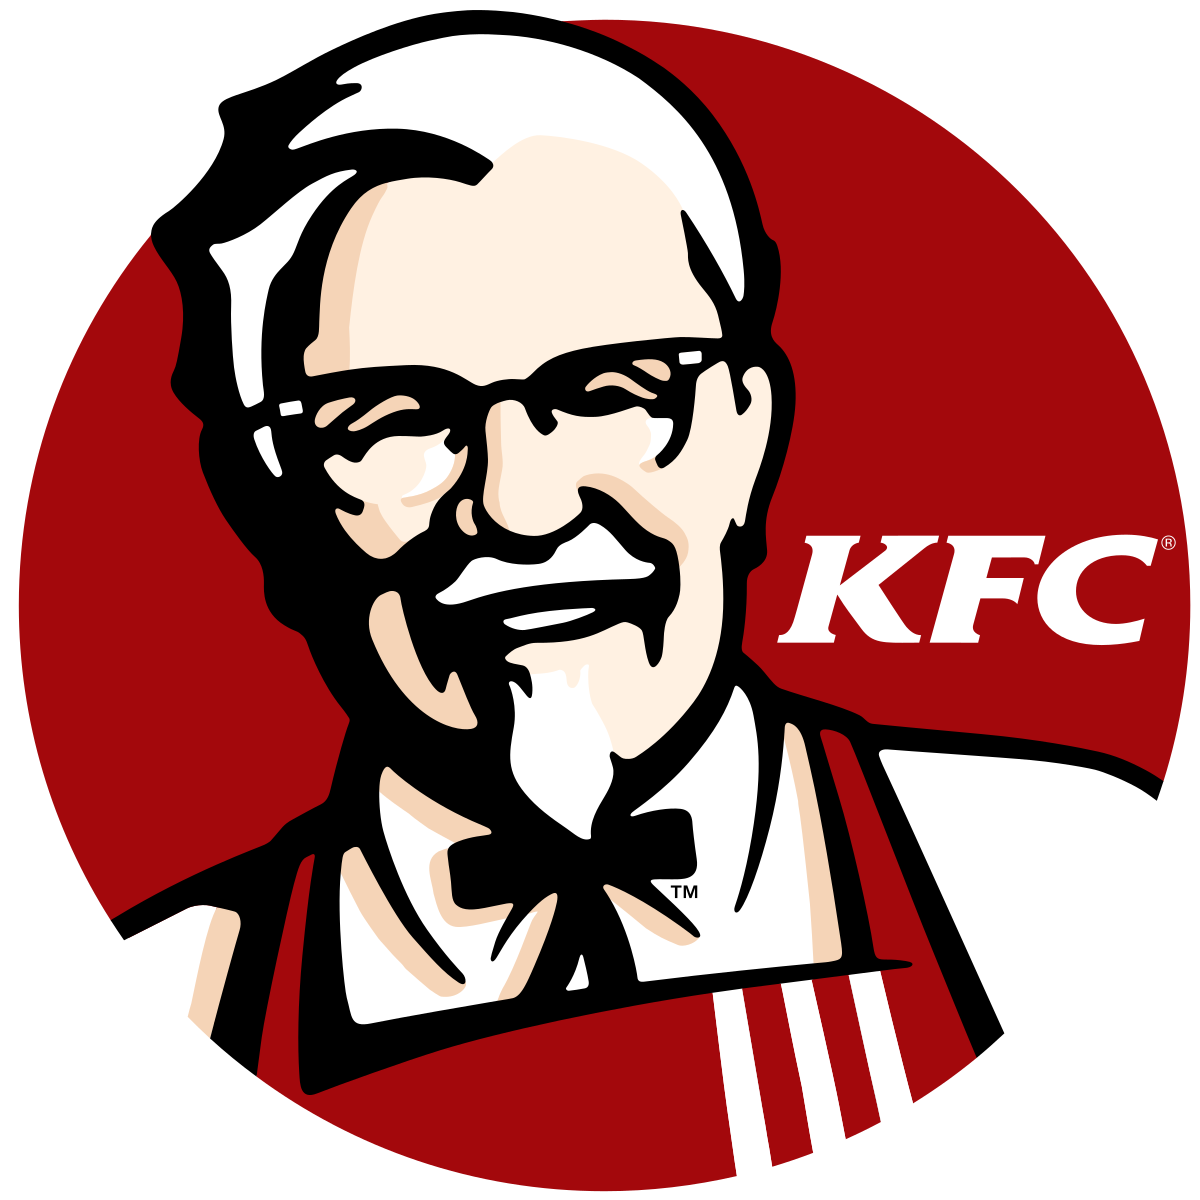 A red circle with a man and the letters KFC.